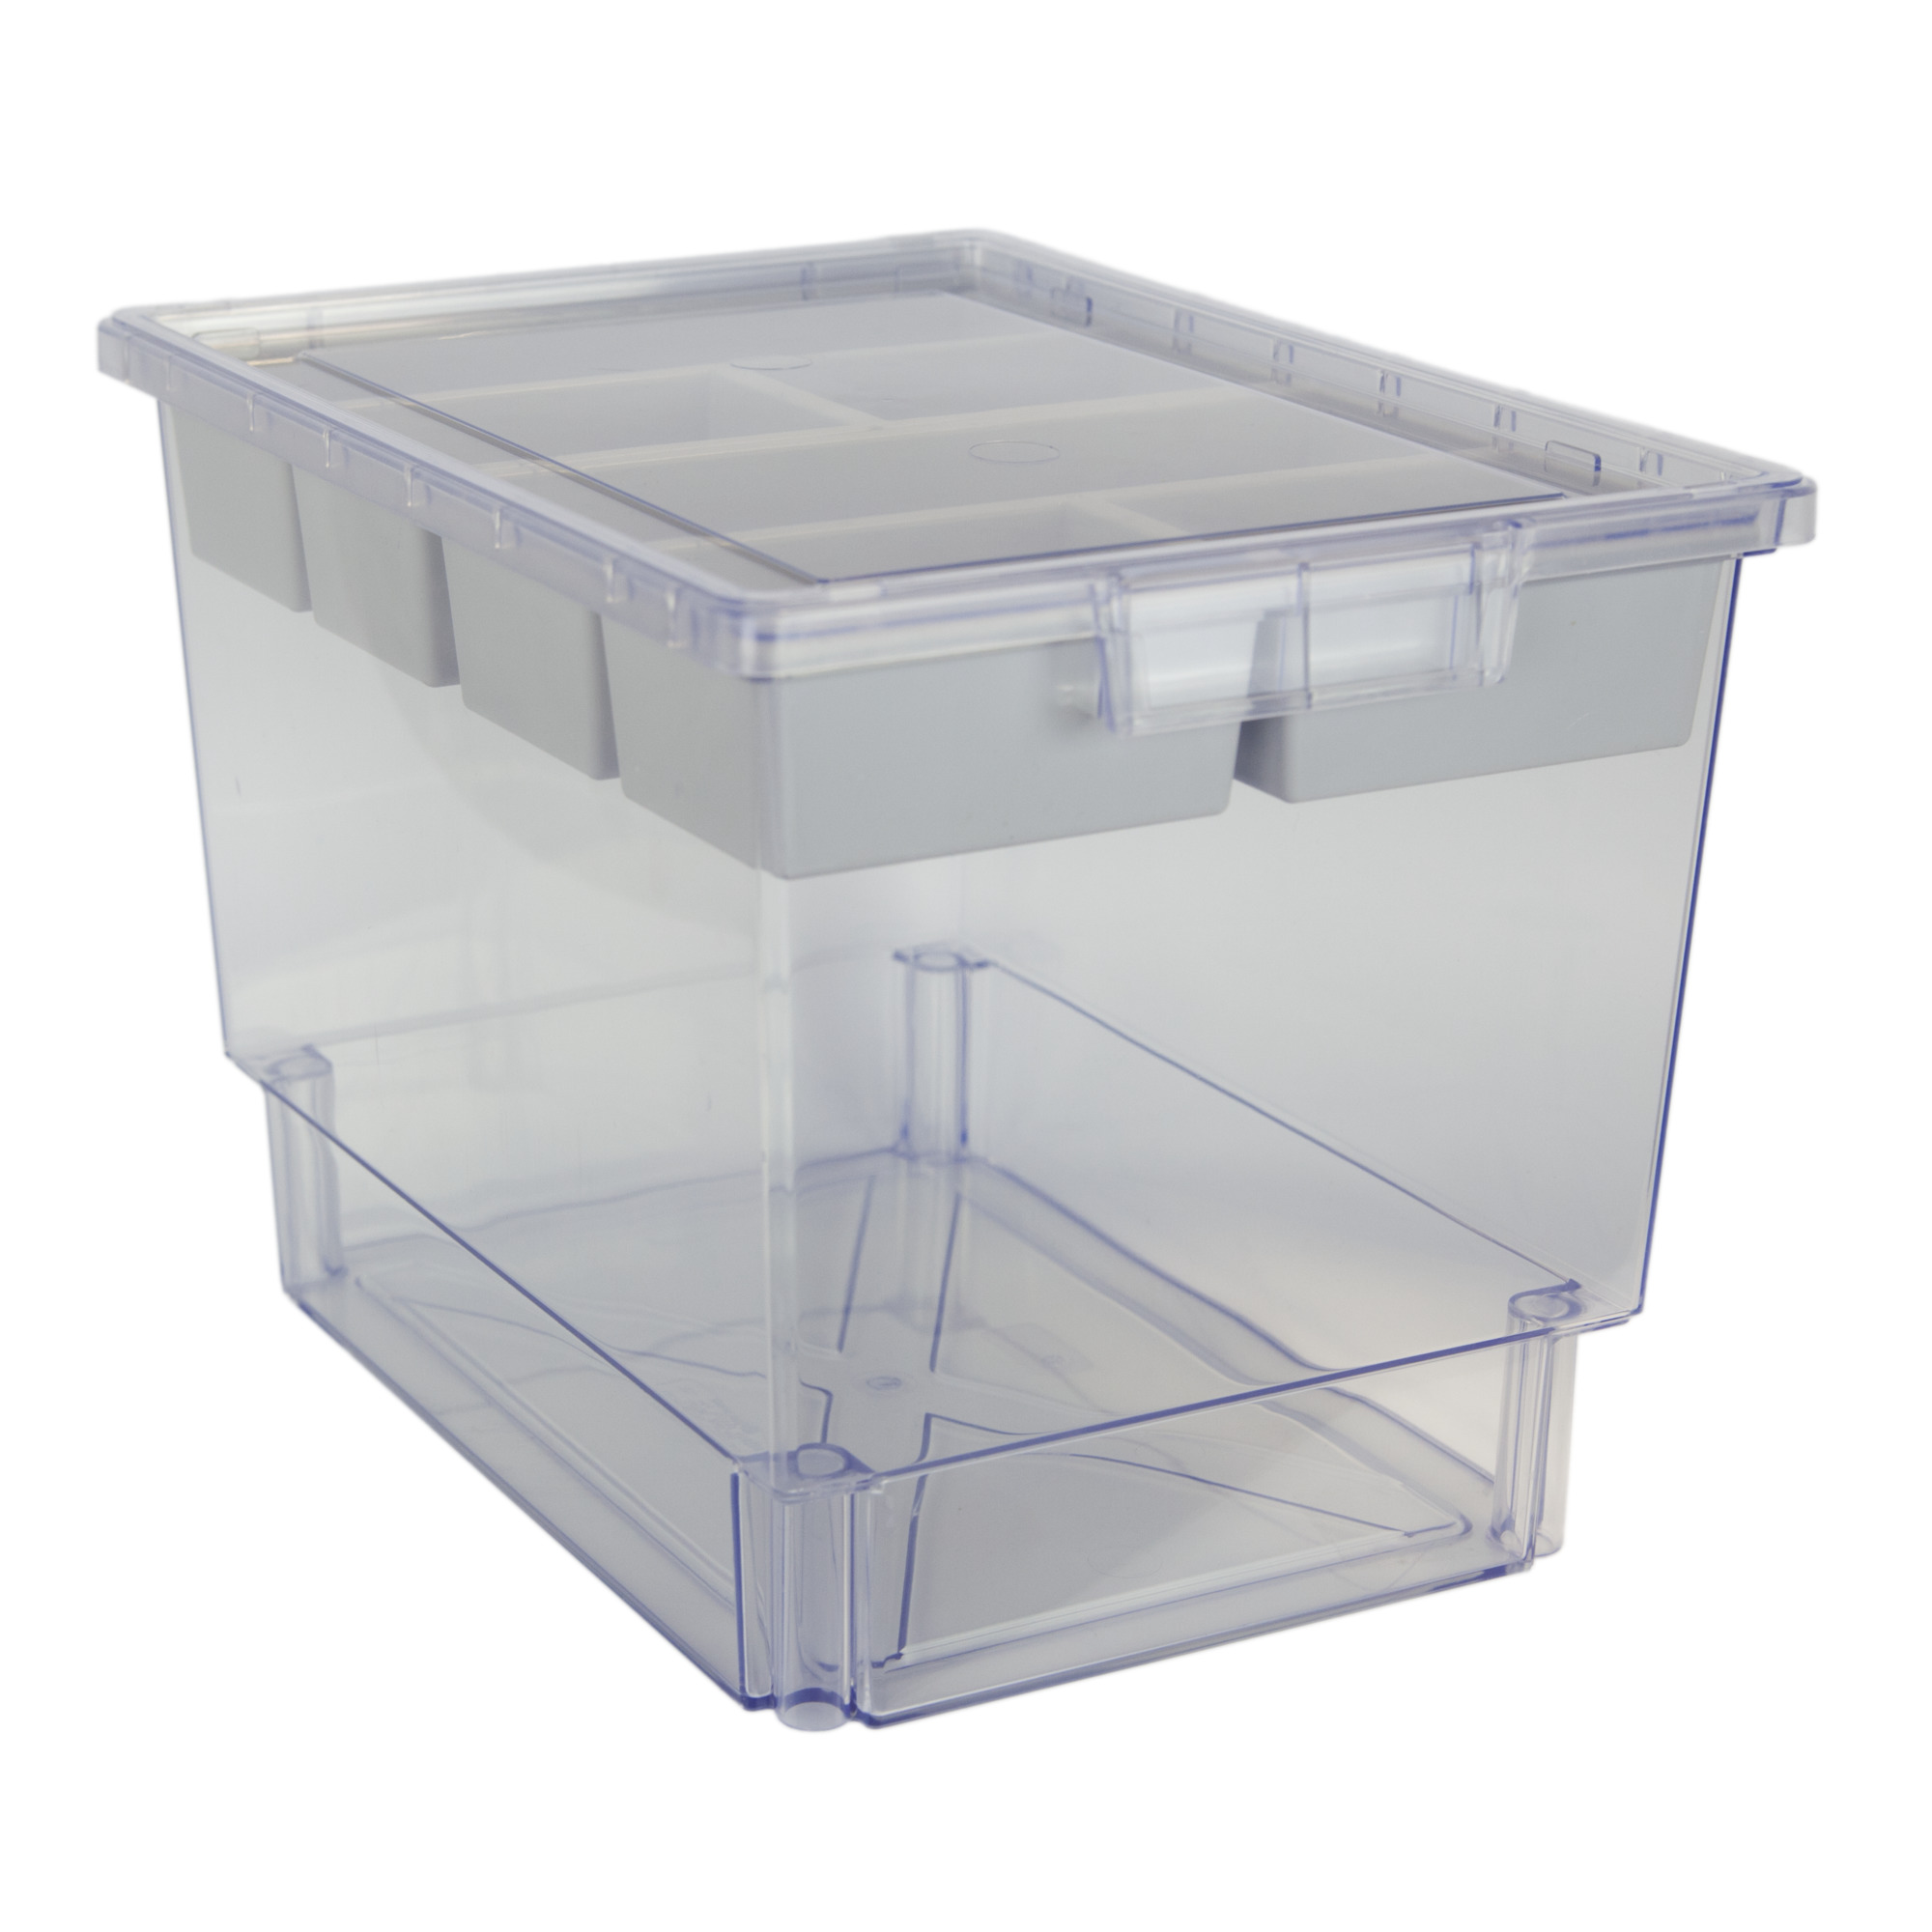 Certwood StorWerks, Slim Line 12Inch Tray Kit (3 x Divisions) Clear, Included (qty.) 1, Material Plastic, Height 9 in, Model CE1954CL-NK0202-1